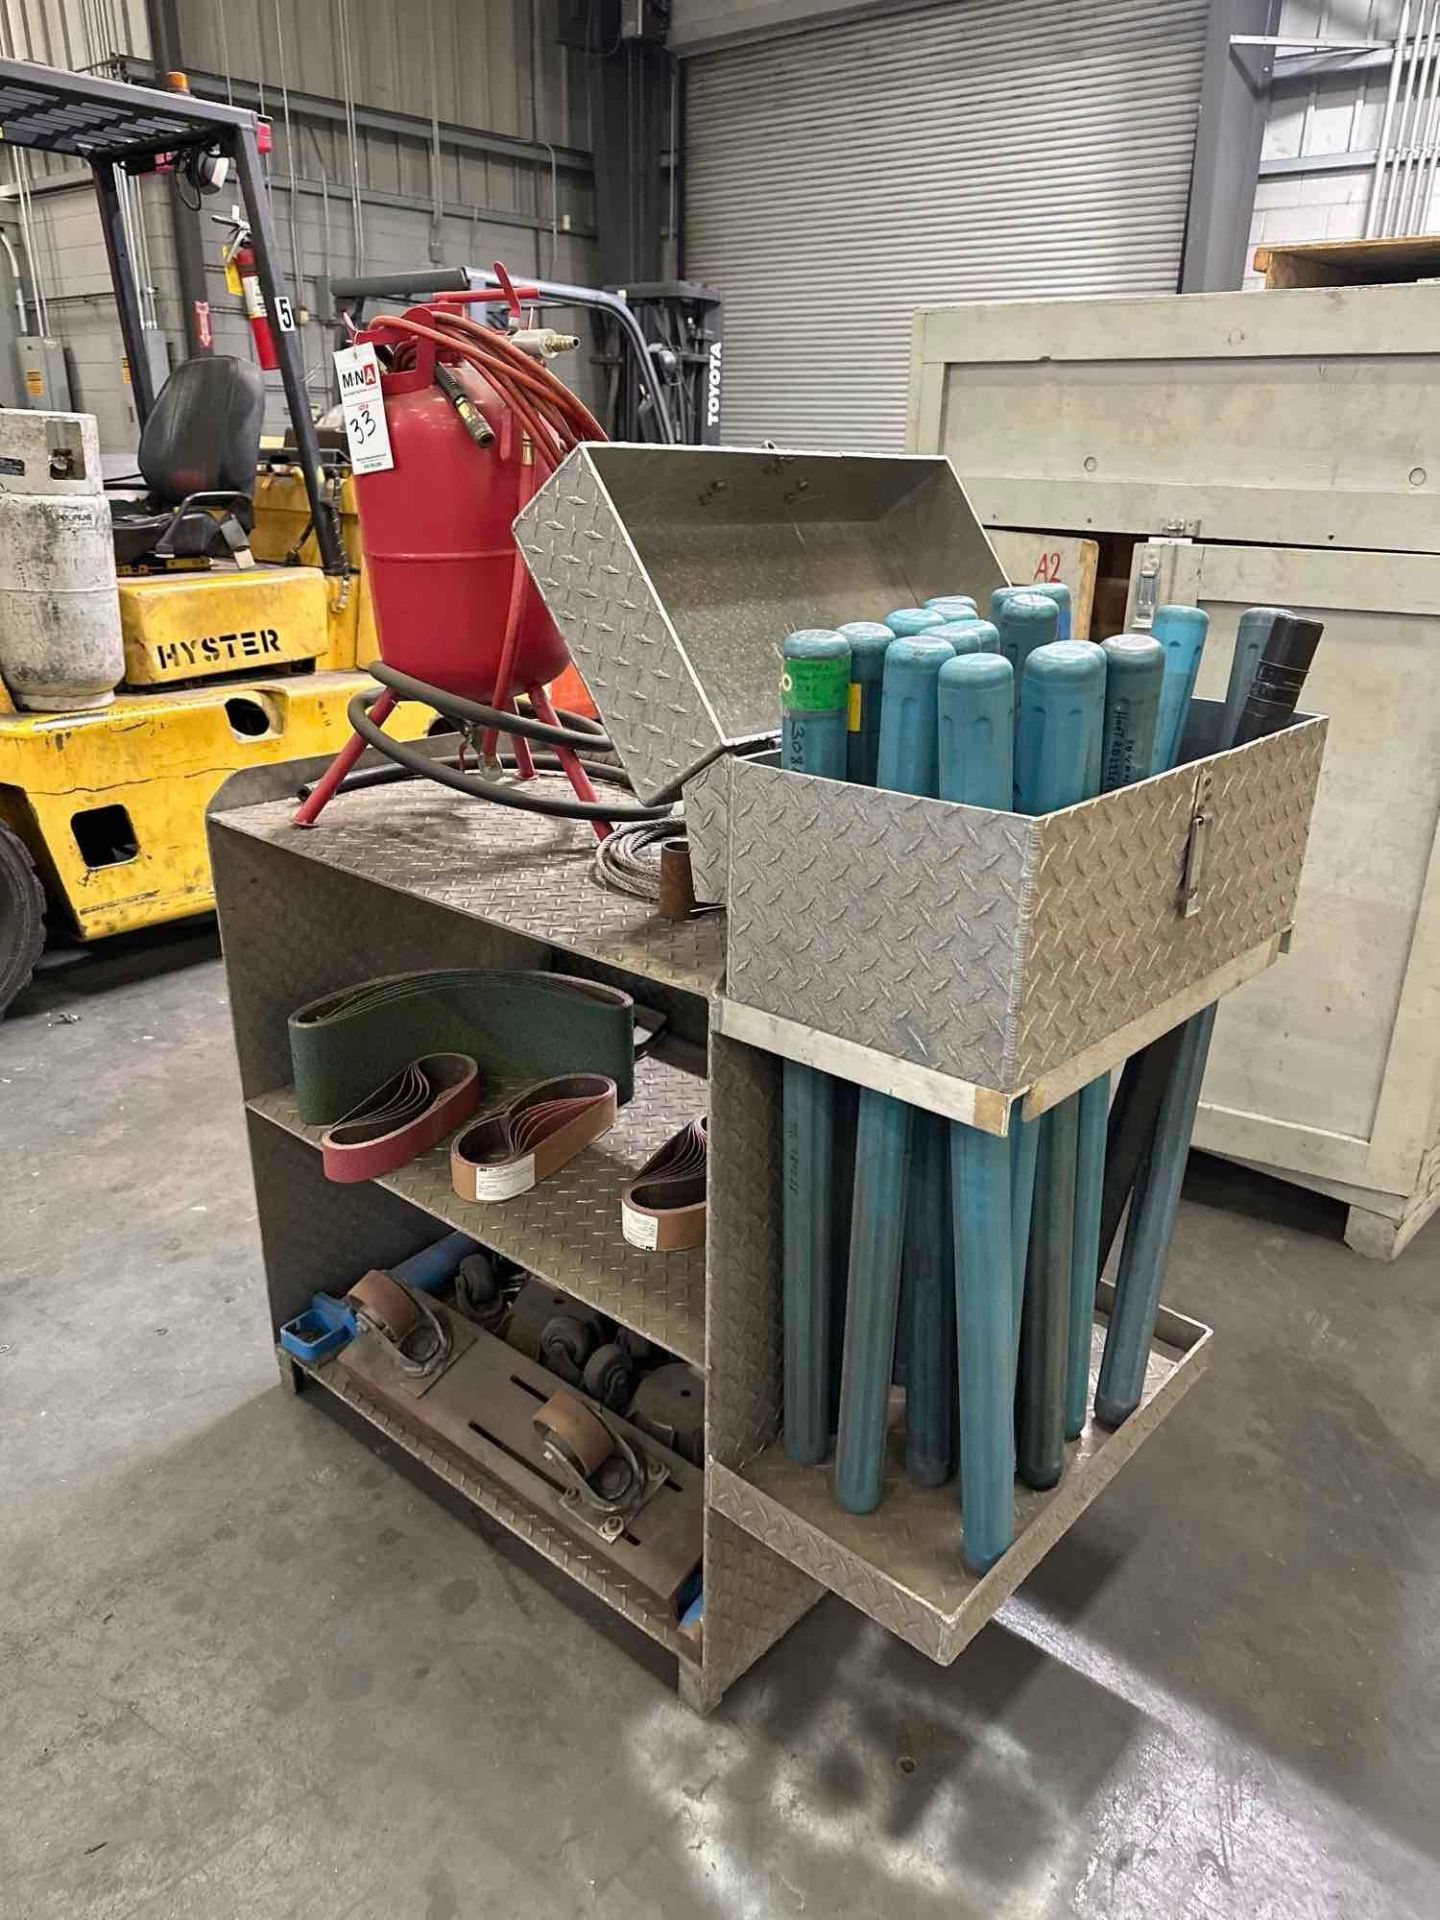 3 Tier Sheet Metal Shelving Unit w/ Central Pnuematic Tank, Welding Rod Containers - Image 2 of 4